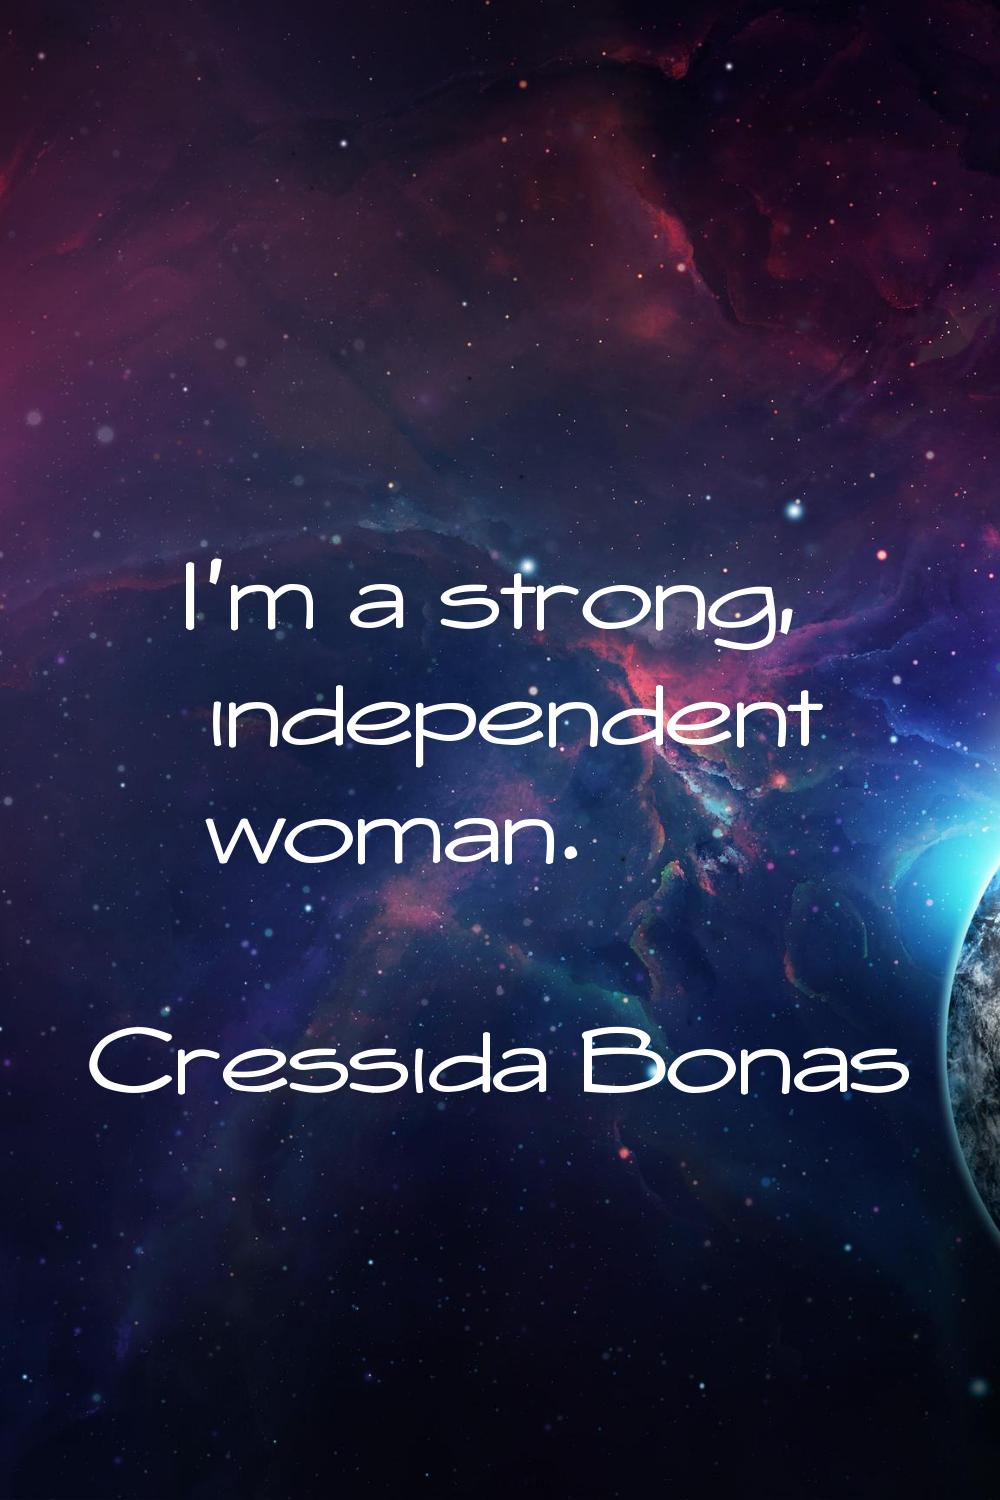 I'm a strong, independent woman.